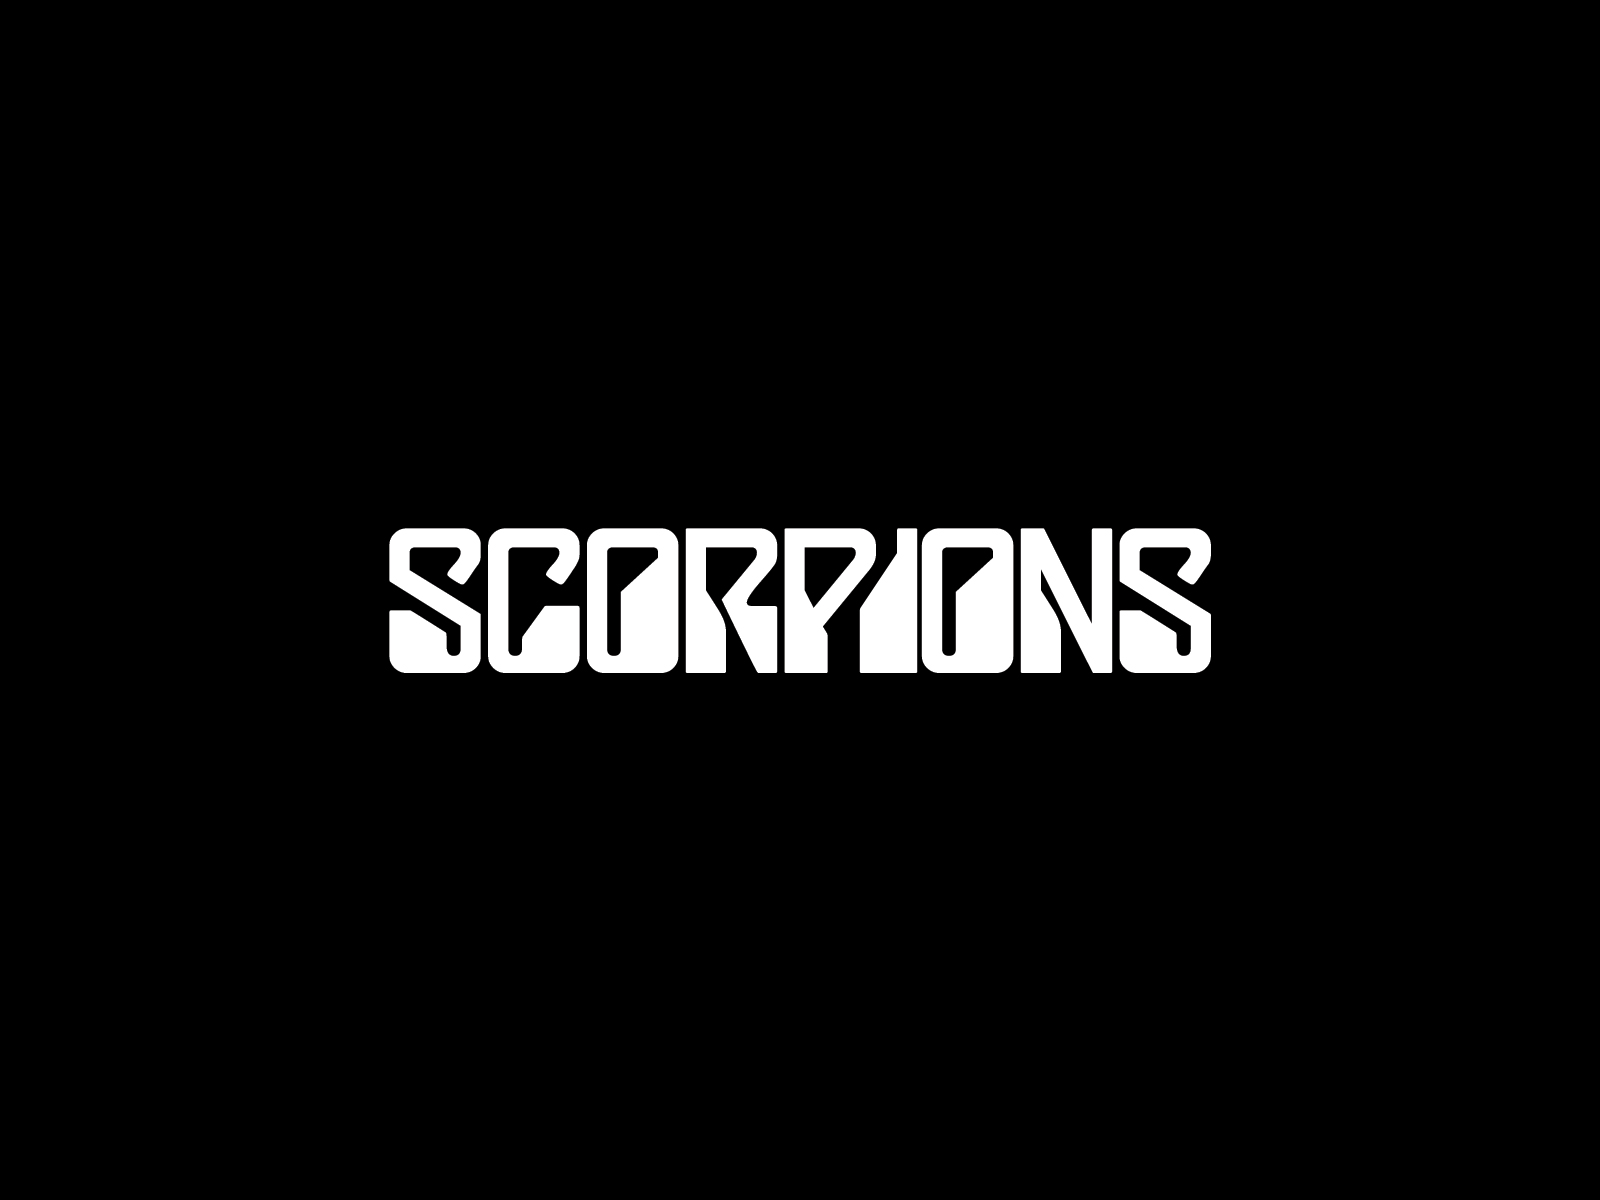 11 Scorpions HD Wallpapers | Backgrounds - Wallpaper Abyss